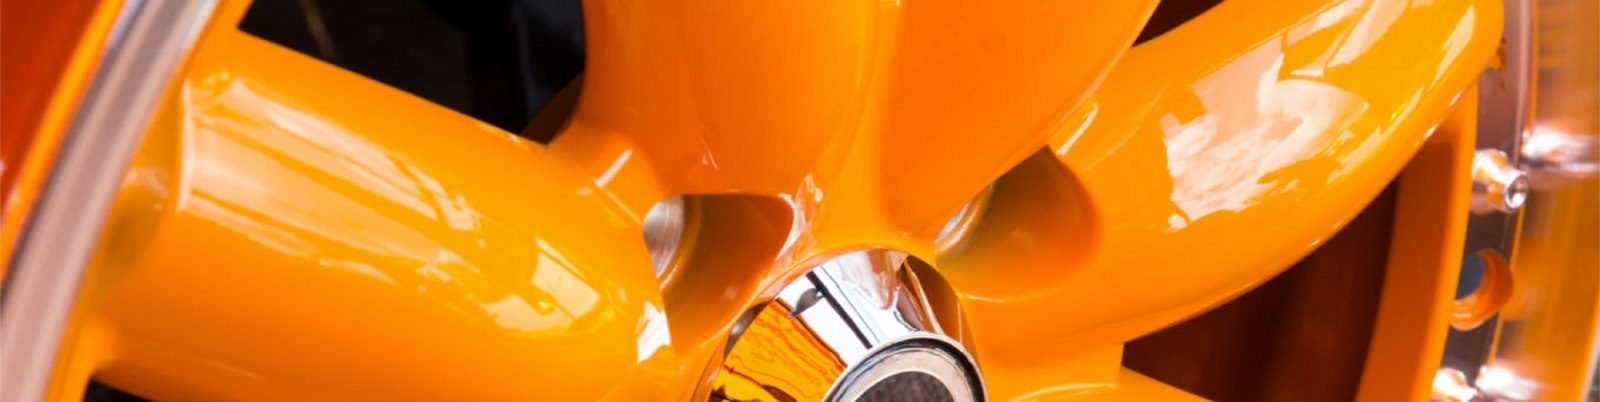 Coatings for automotive components